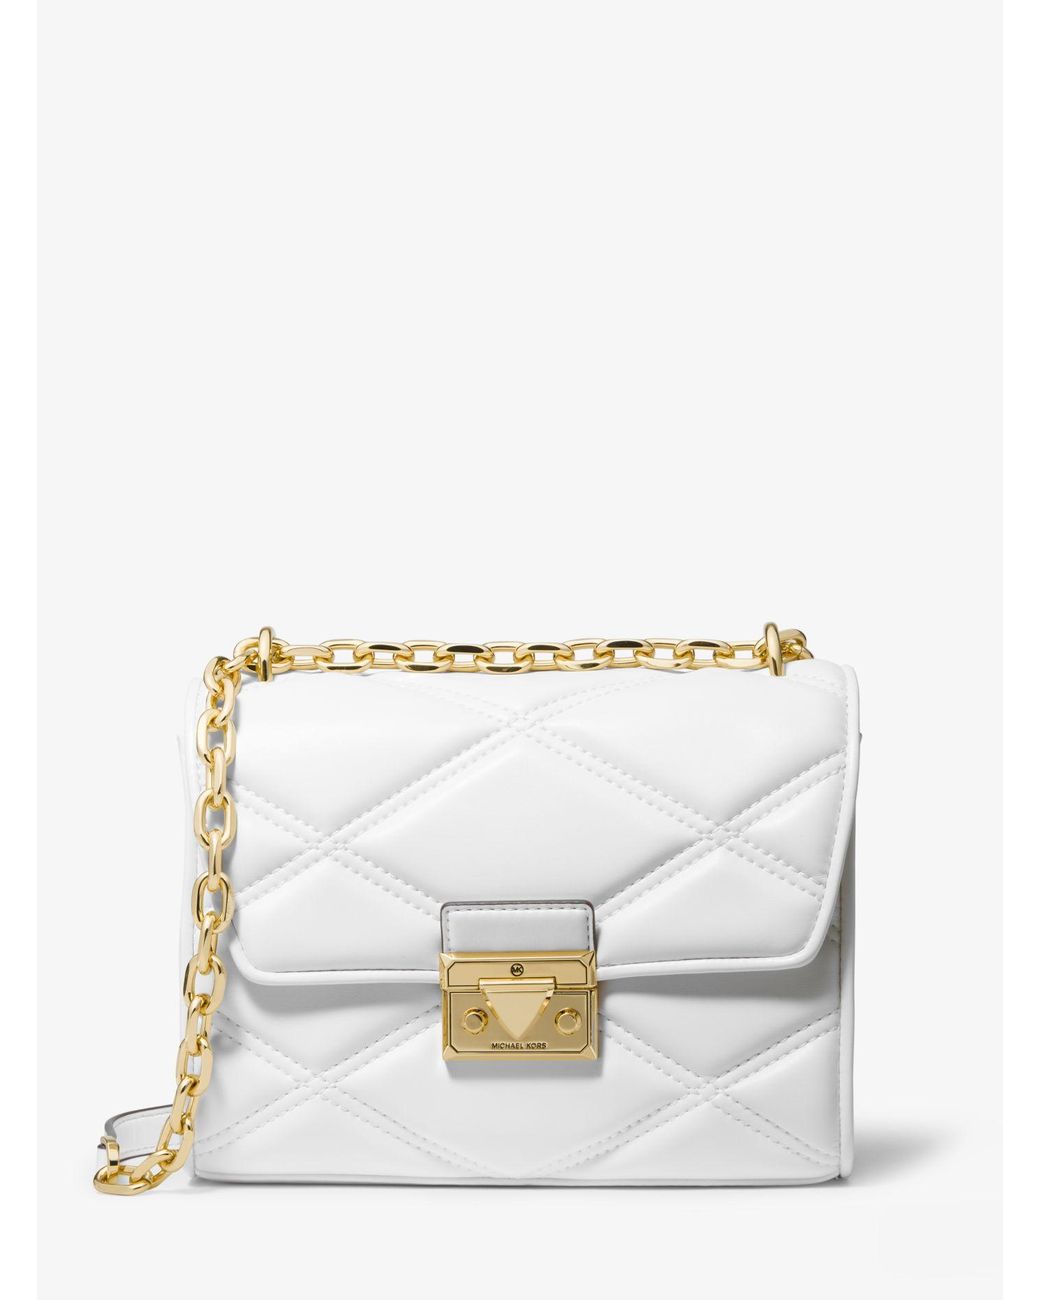 Michael Kors Serena Small Quilted Faux Leather Crossbody Bag in White ...